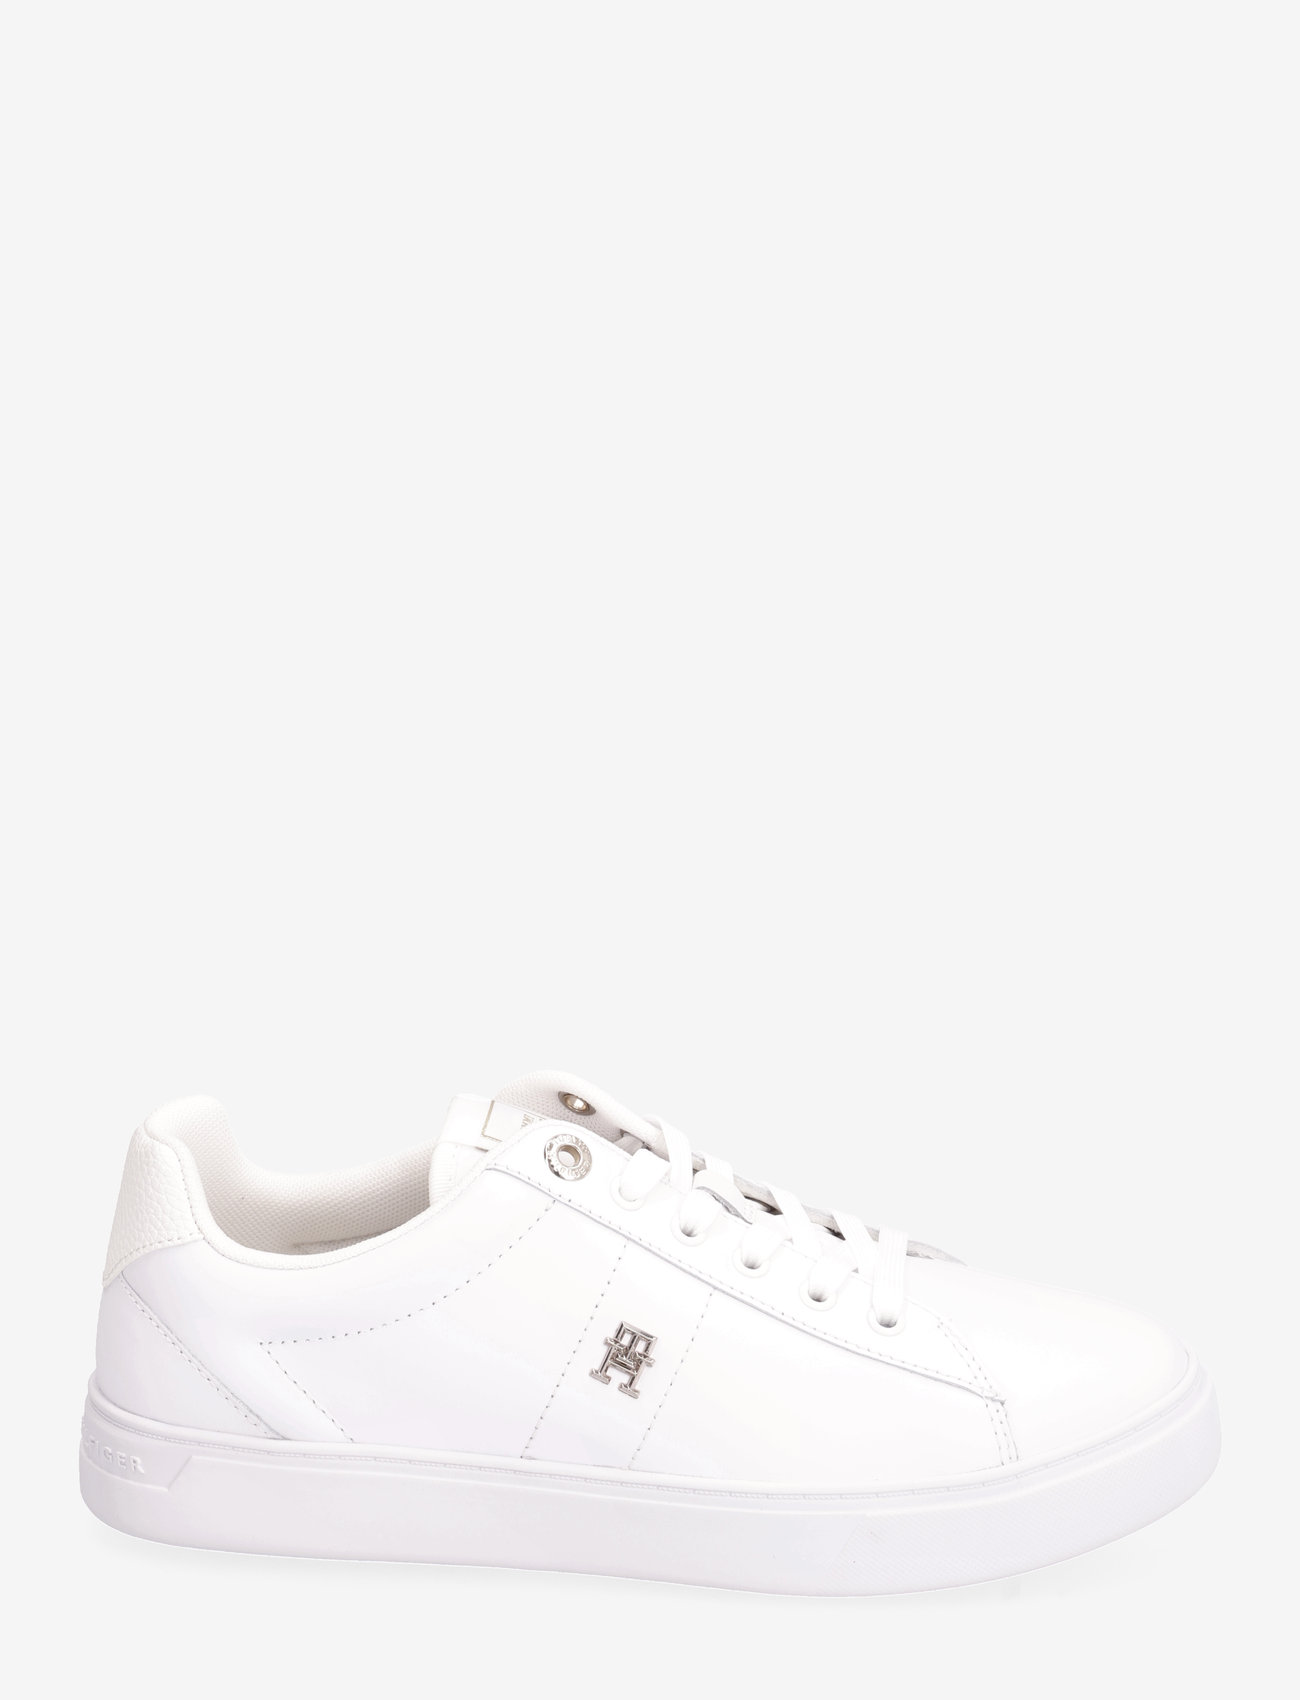 Tommy Hilfiger - ESSENTIAL ELEVATED COURT SNEAKER - niedrige sneakers - white - 1